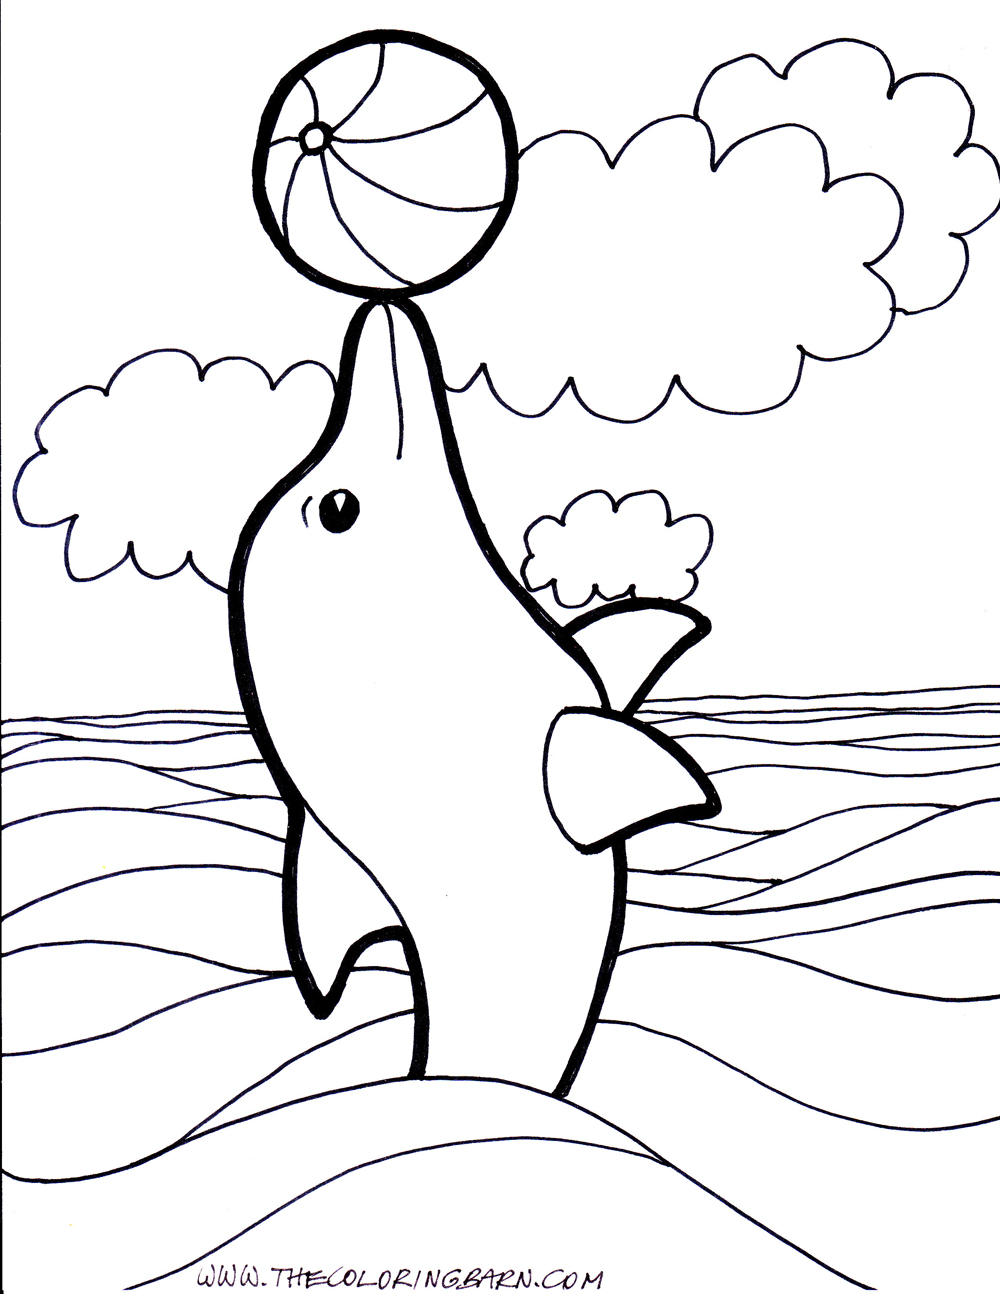 Coloring Pages Dolphins 177 | Free Printable Coloring Pages